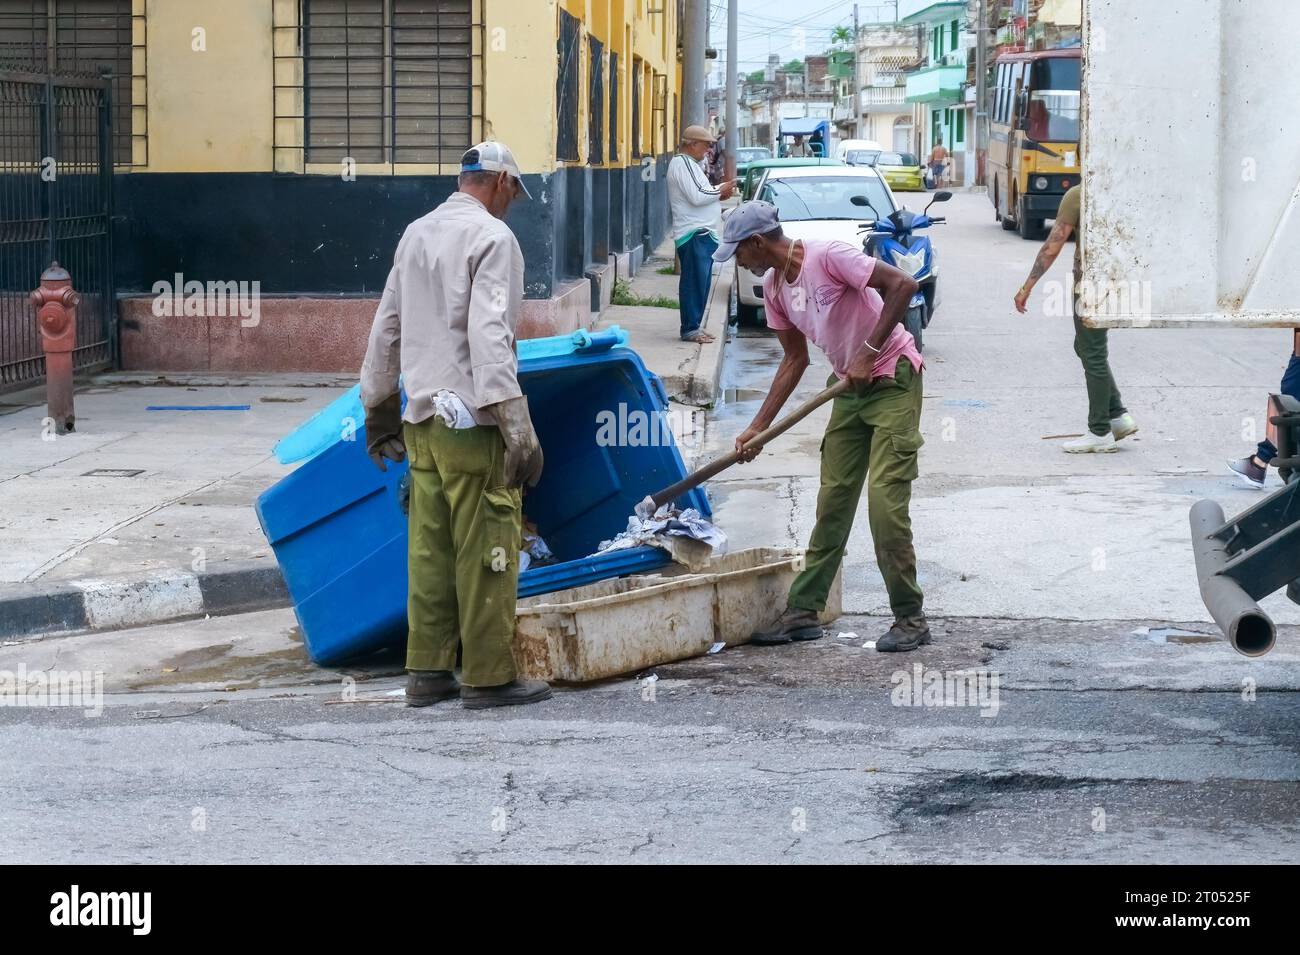 Cuban men working in garbage collection on a city street.They are emptying the large bin with a hoe while a truck is waiting for them.Santa Clara, Cub Stock Photo